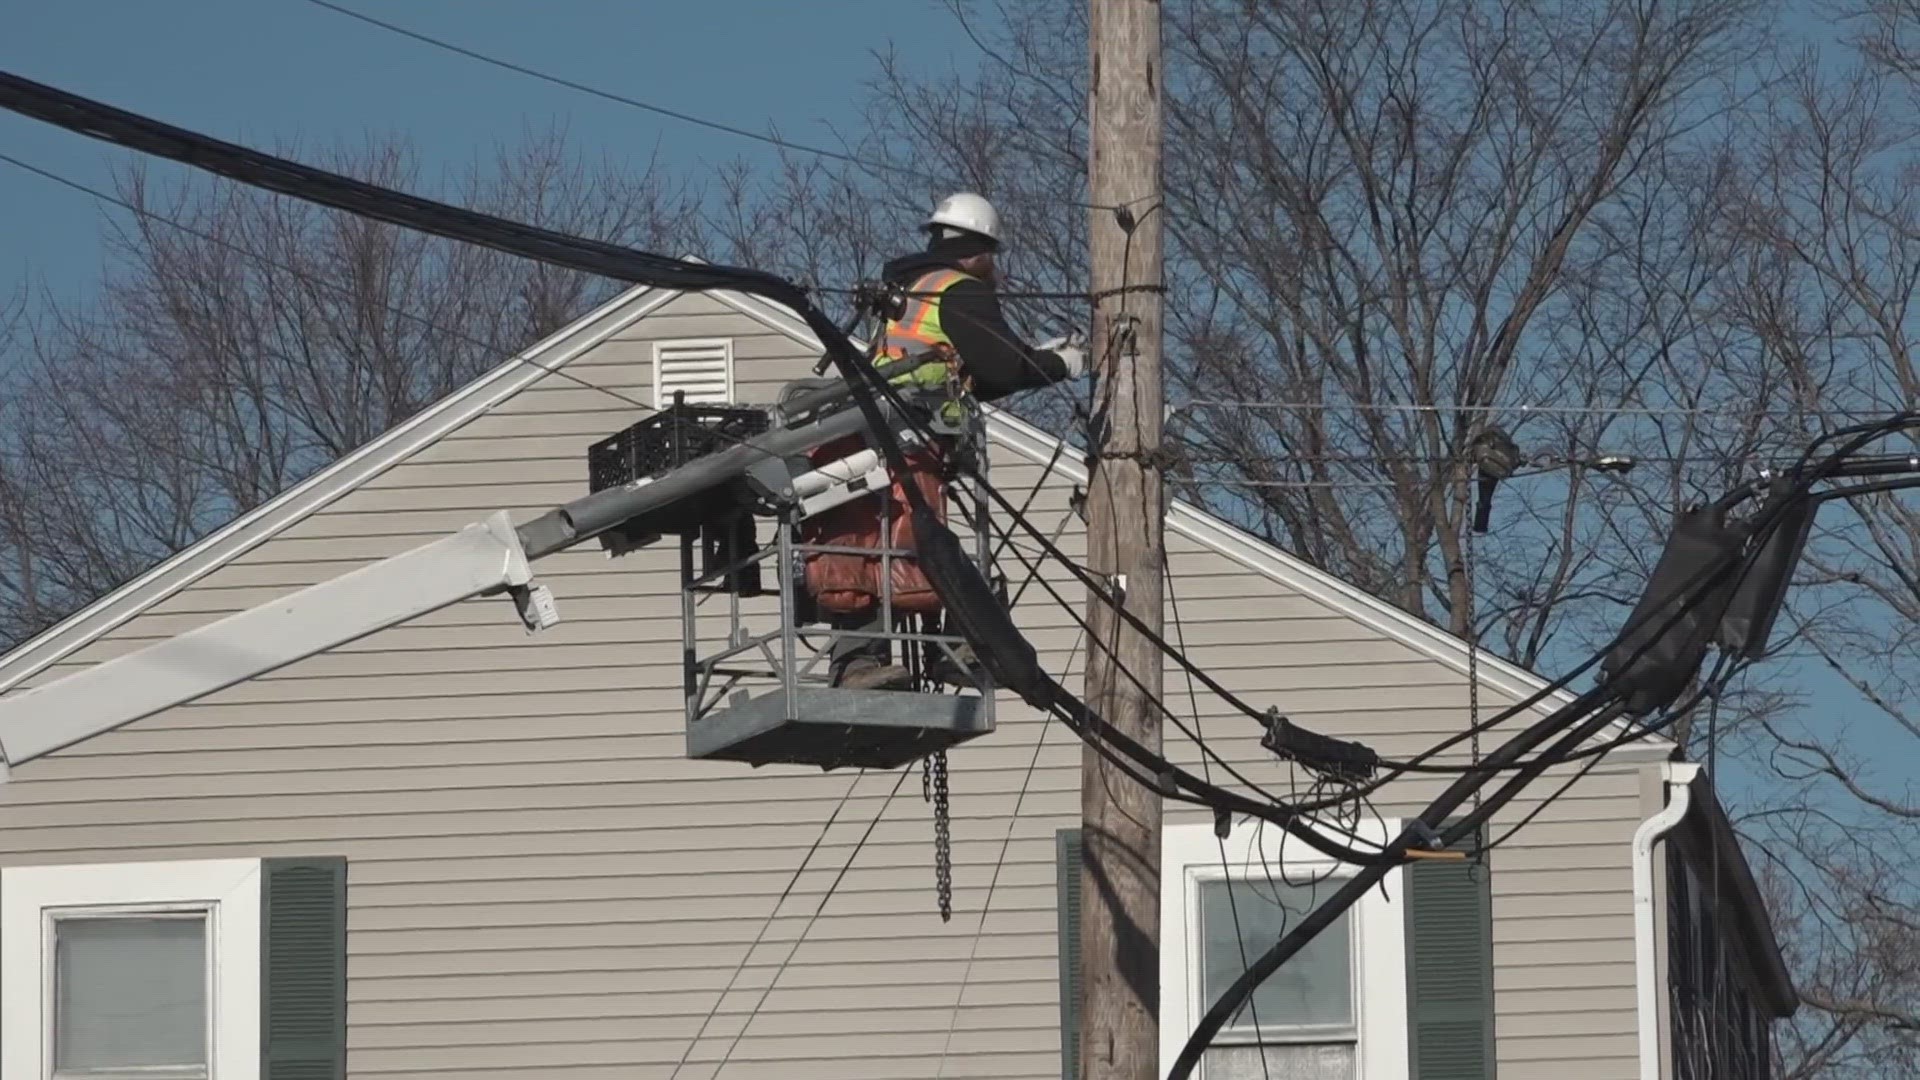 Crews are working in Greater Bangor and eastern Maine, as more than 28,000 customers remained in the dark as of 4 p.m. Thursday.